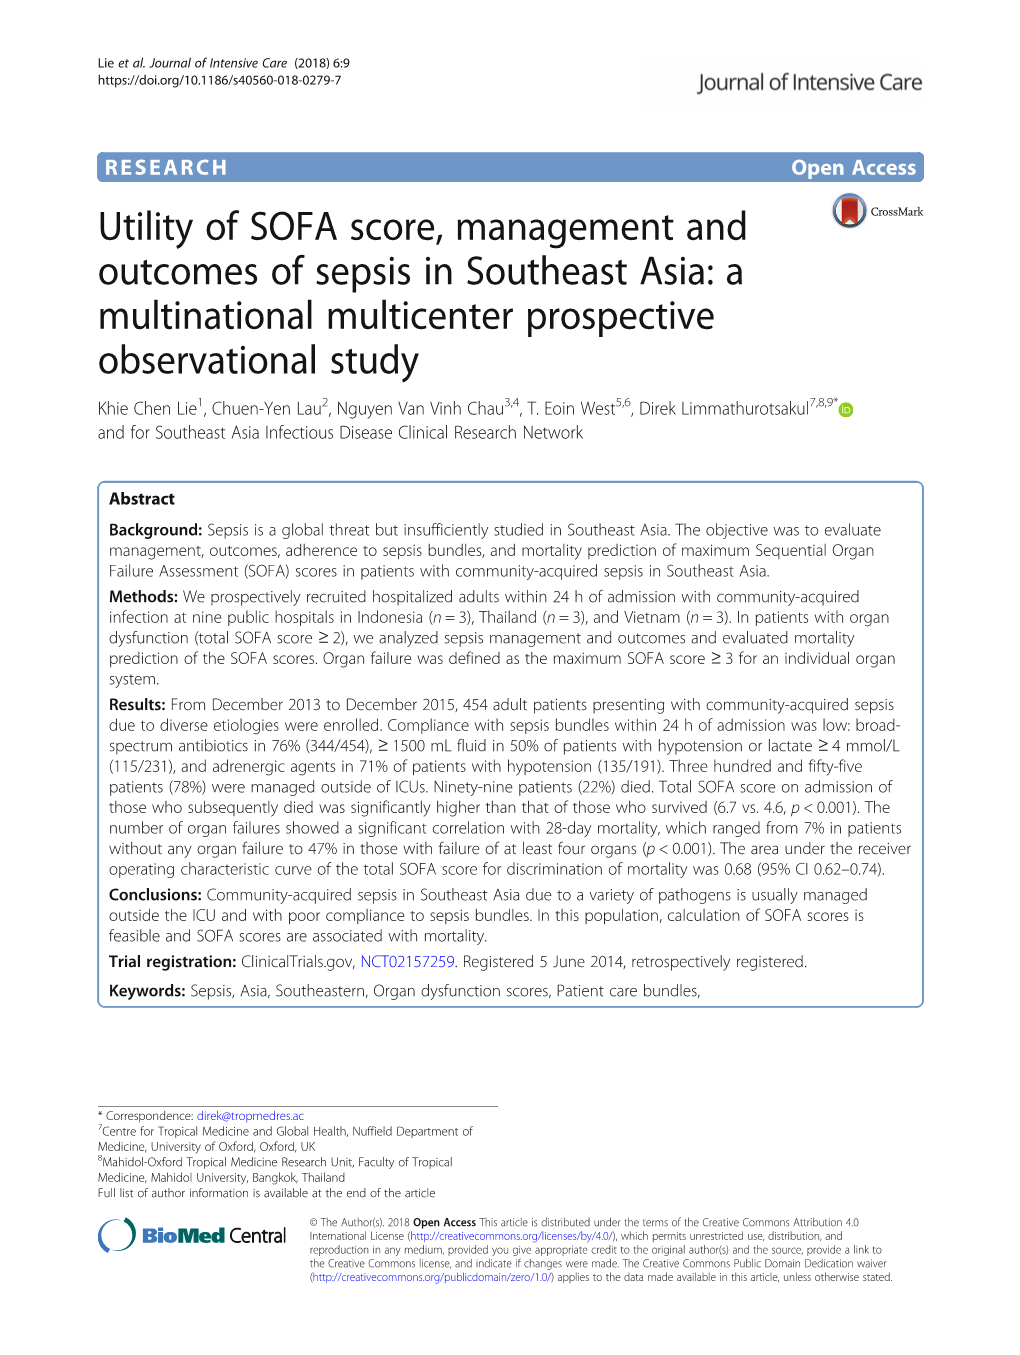 Utility of SOFA Score, Management and Outcomes of Sepsis In